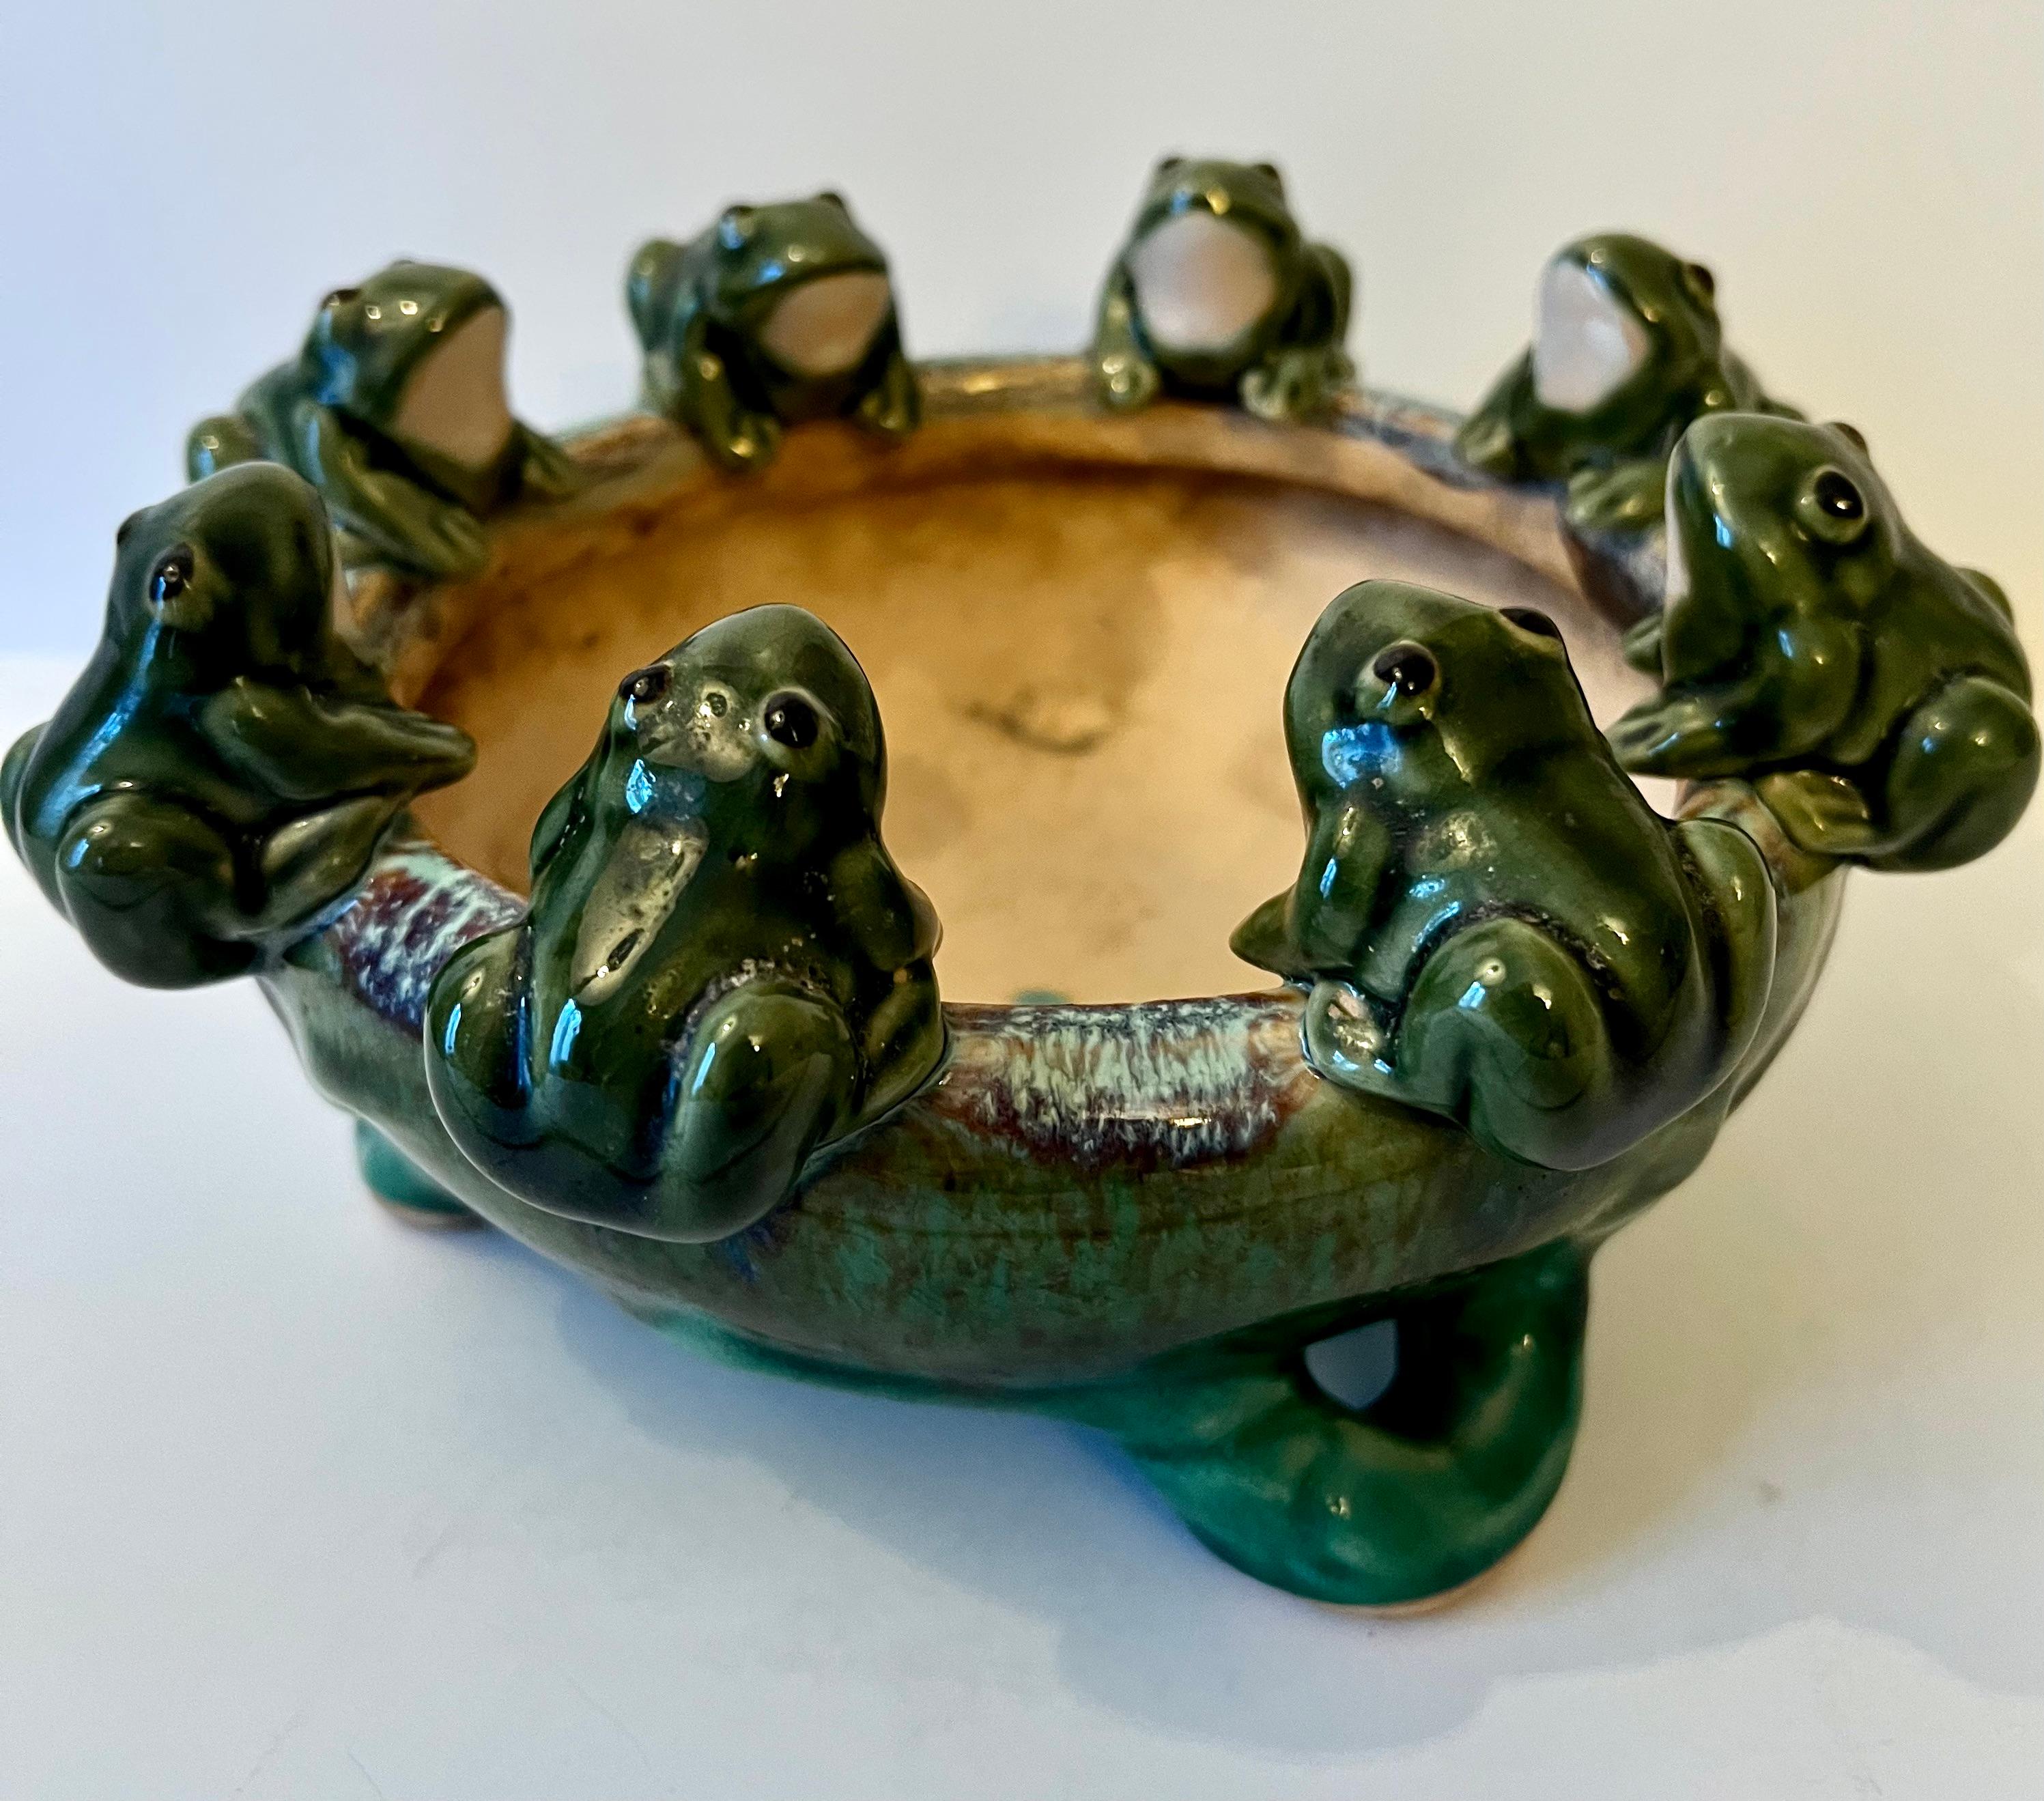 Mid-Century Modern Glazed Terracotta Footed Planter or Jardiniere with Frogs 